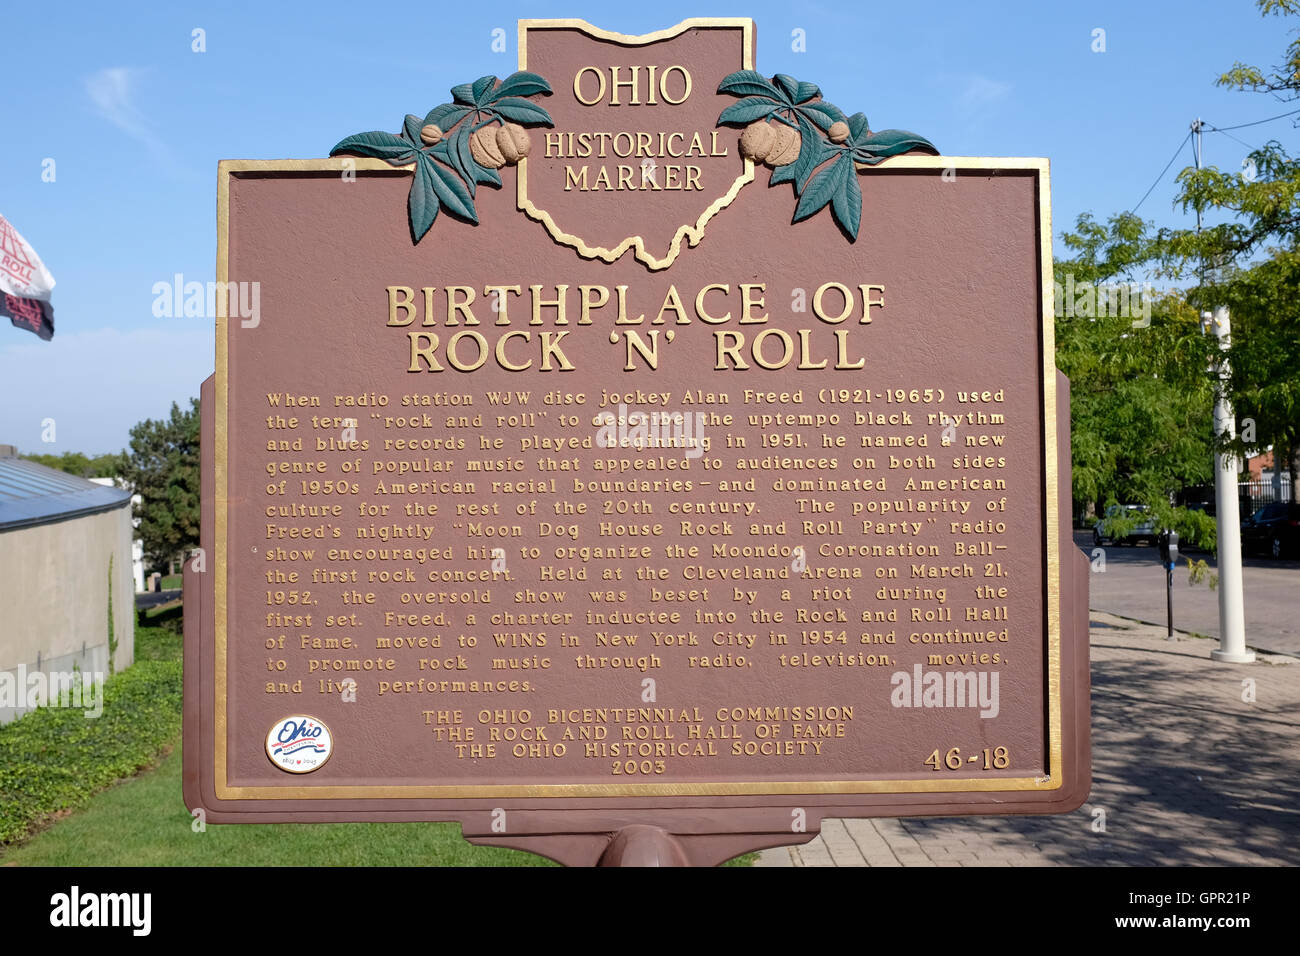 Ohio Historical Marker - Birthplace of Rock and Roll - Cleveland, Ohio Stock Photo